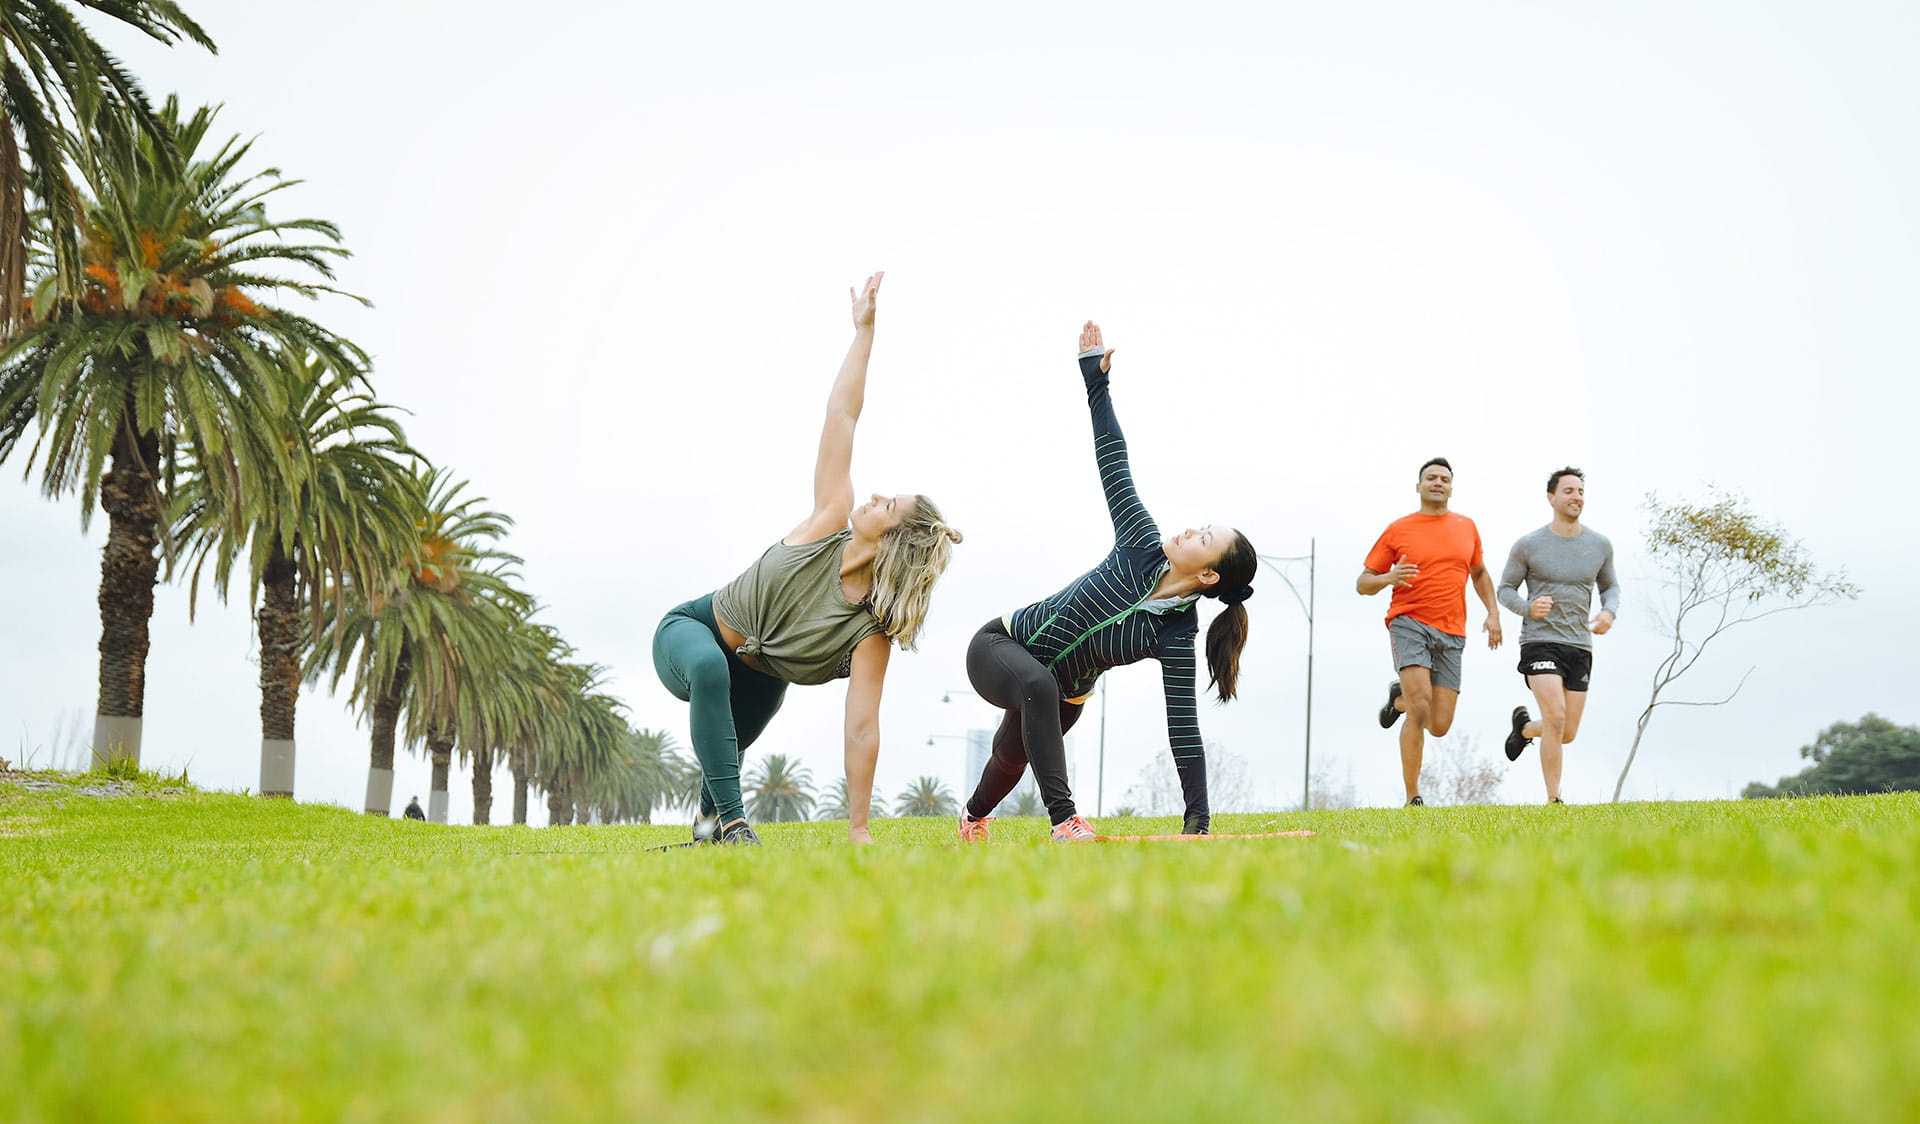 Two women practicing yoga side-by-side with two men running for fitness in the background